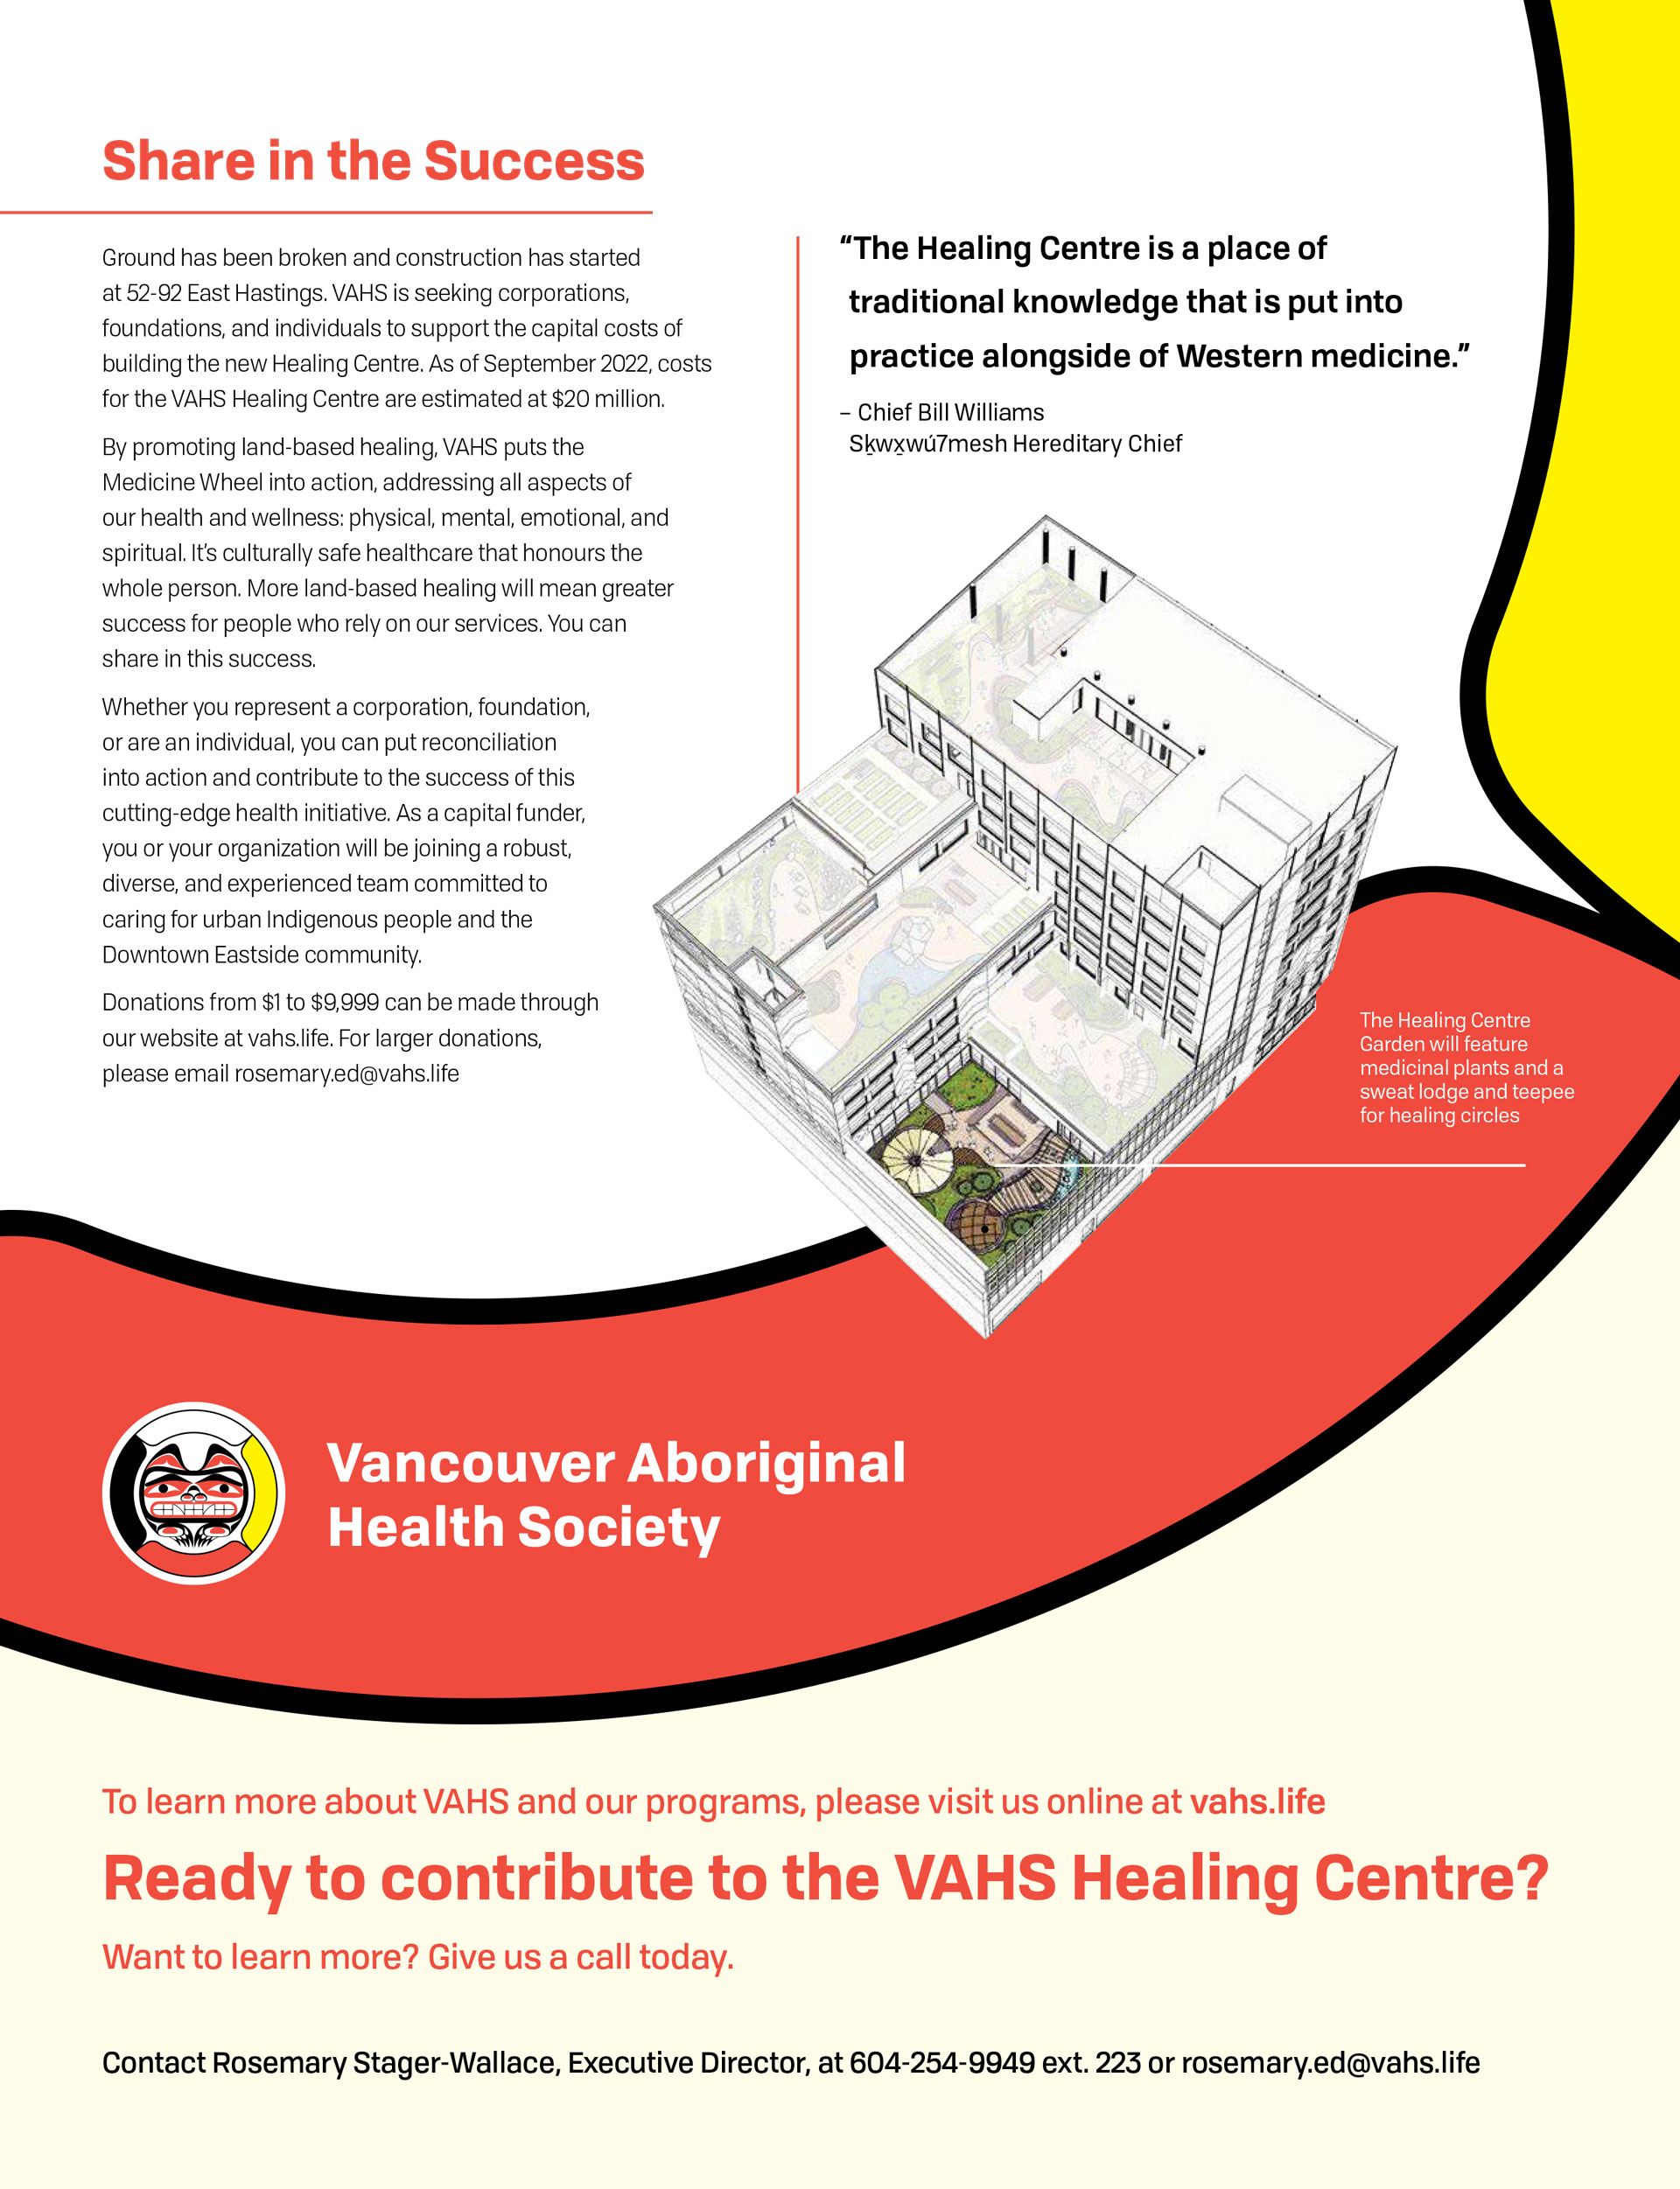 VAHS Healing Centre brochure, page 4, contact info and contribution